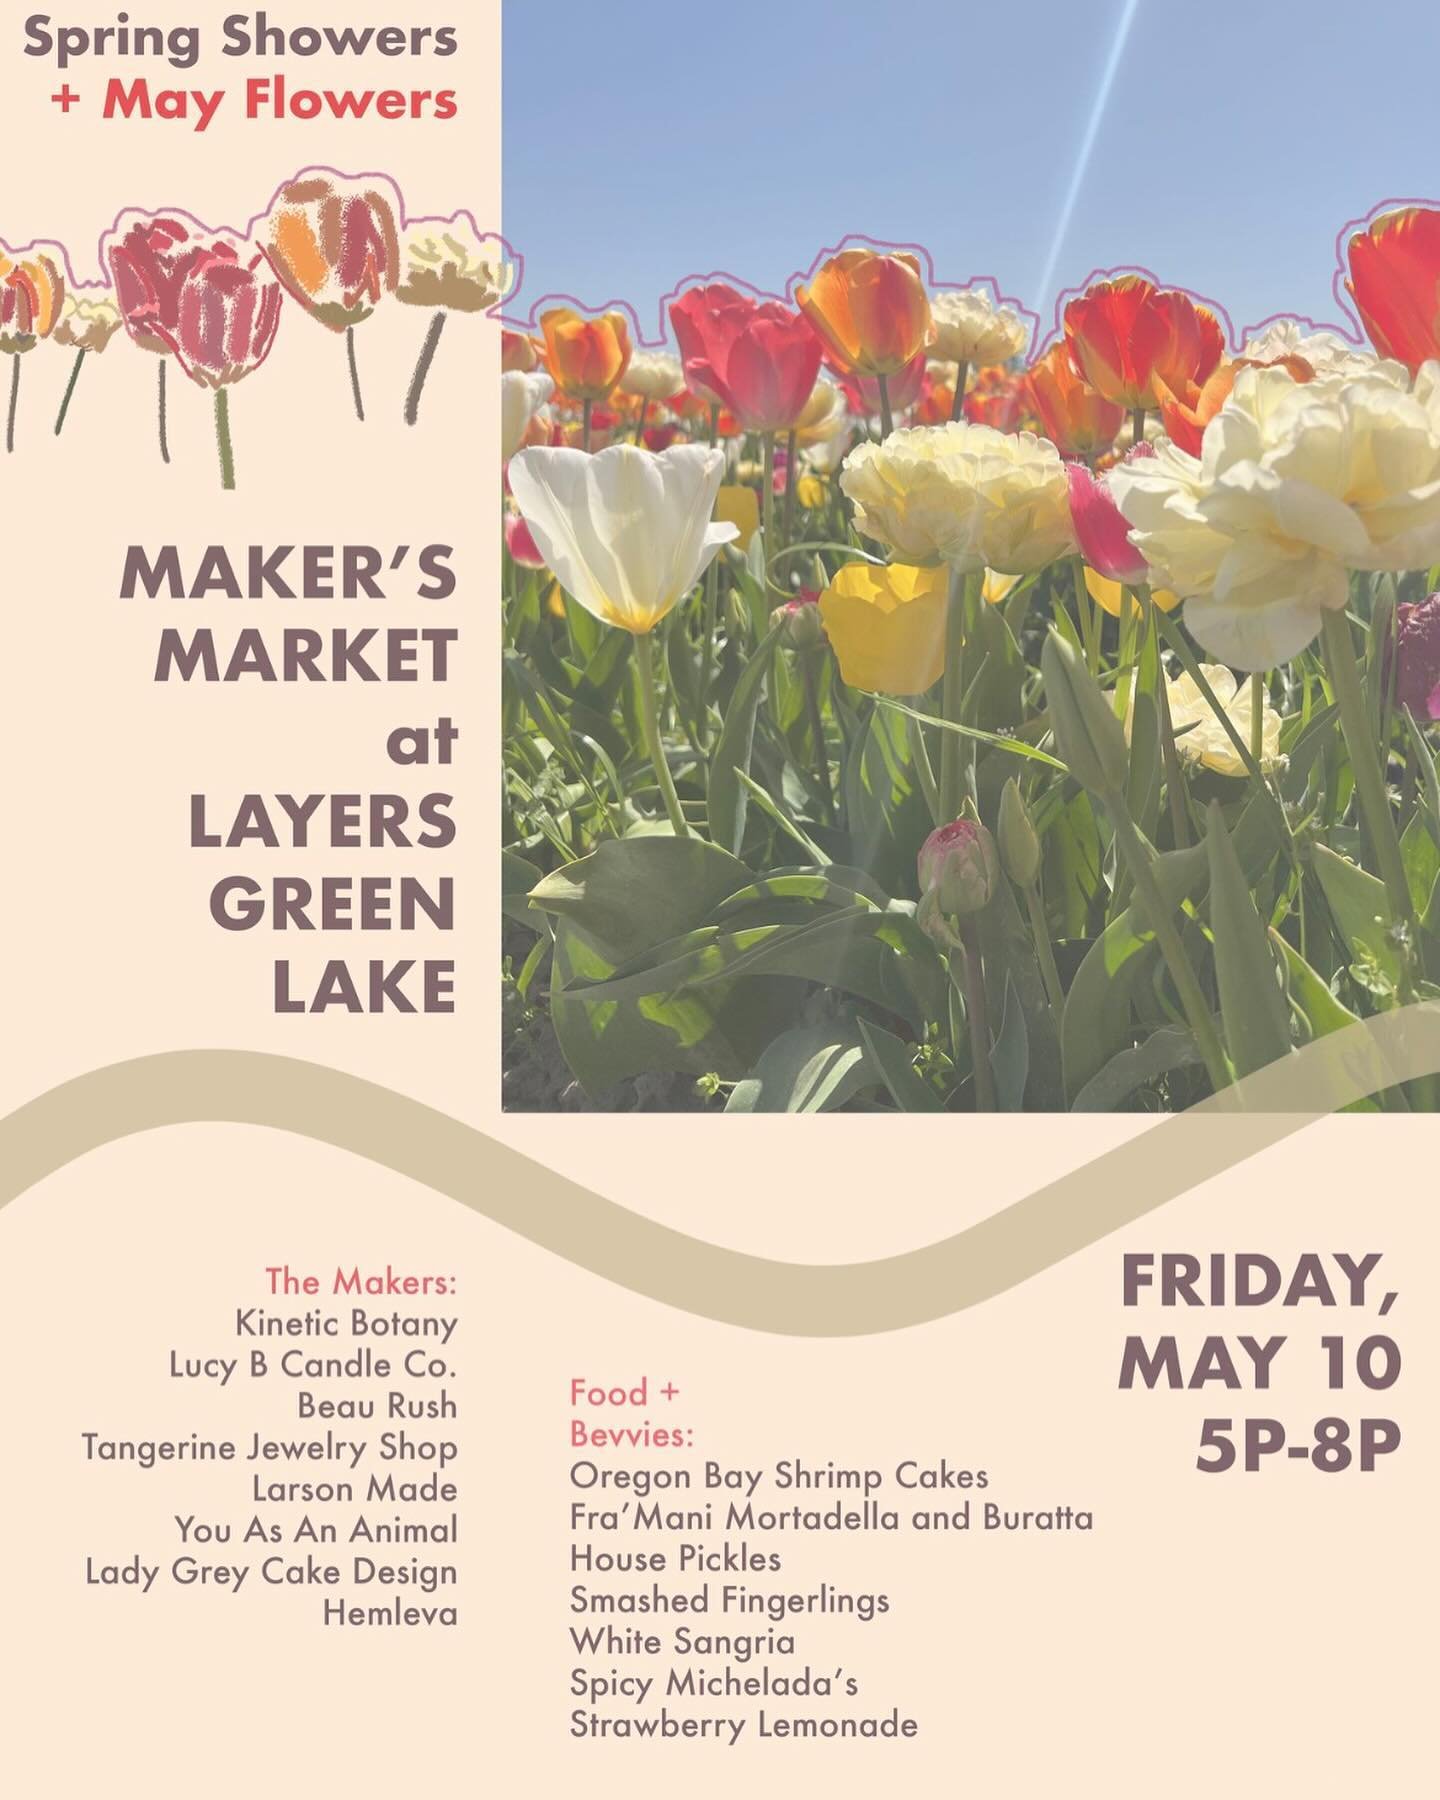 The day has come friends! It&rsquo;s Spring Showers, May Flowers Maker&rsquo;s Market Day and the sun is shiiining!!
We&rsquo;re thrilled to have @kineticbotany @lucybcandleco @beaurush @larson.made @_youasananimal @ladygreyseattle @hemleva with us t